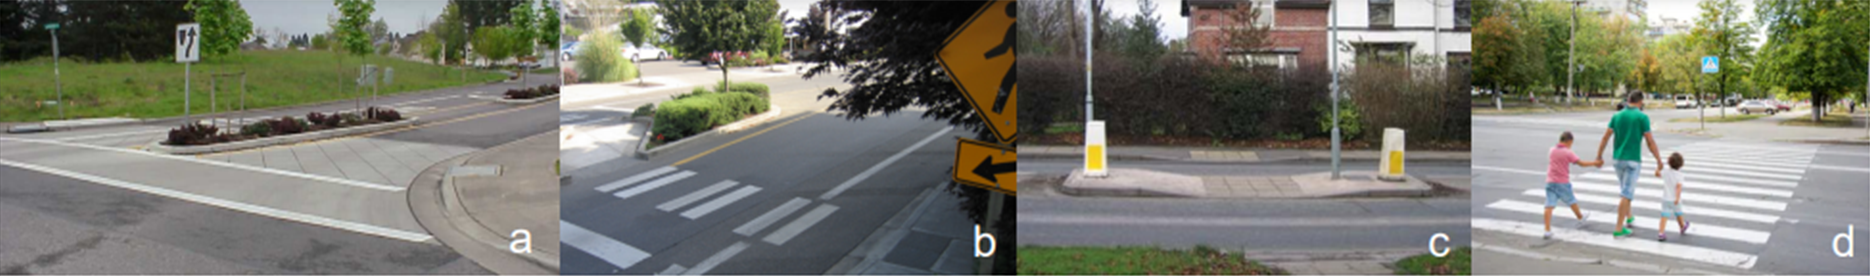 Some examples of uncontrolled crosswalks where no traffic-halting signal devices are present